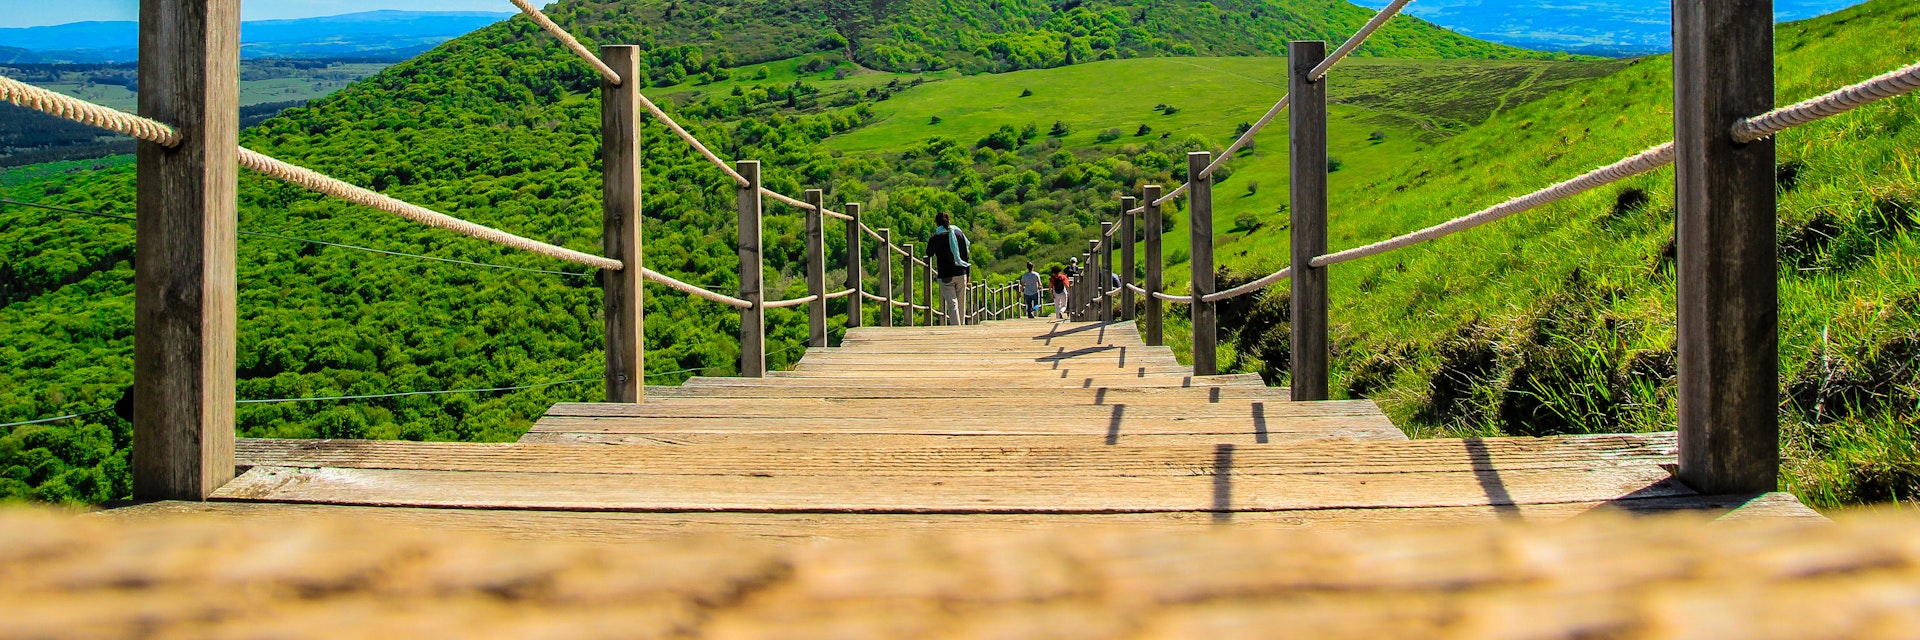 Stairs leading down towards Puy de Dome volcano.